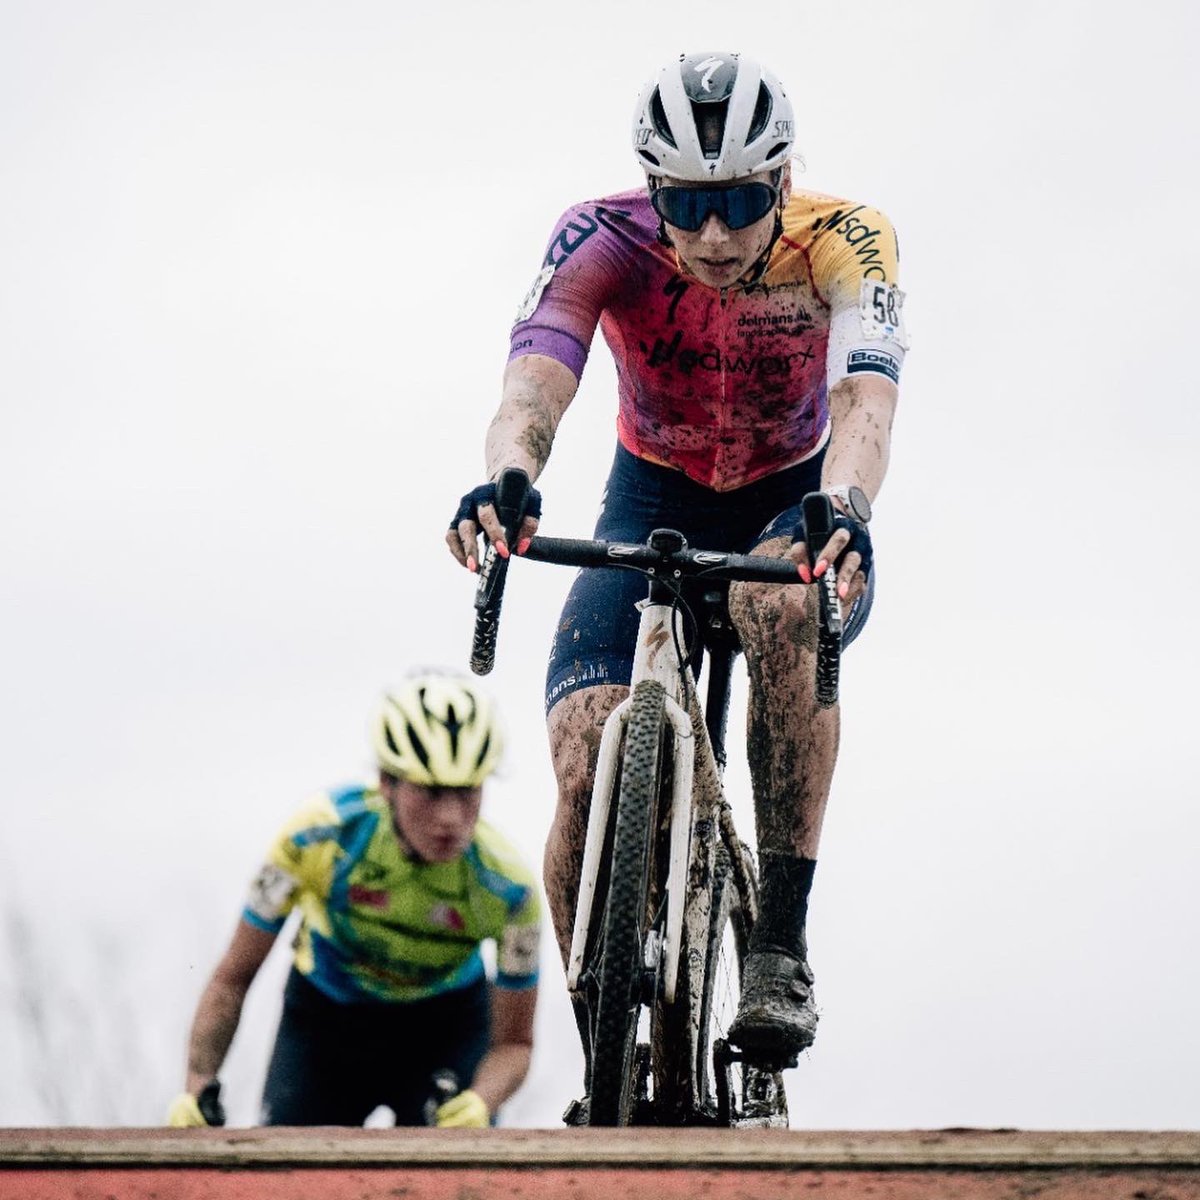 Debut day ✨ @lorenawiebes made her debut for Team SD Worx in the GP Sven Nys today. 🔥 She rode in our training kit. The CX was a good preparation for the upcoming season, Lorena finished 36th. Next up: team training camp in 🇪🇸 Let’s go! 🦄 📸 @billy_lebelge